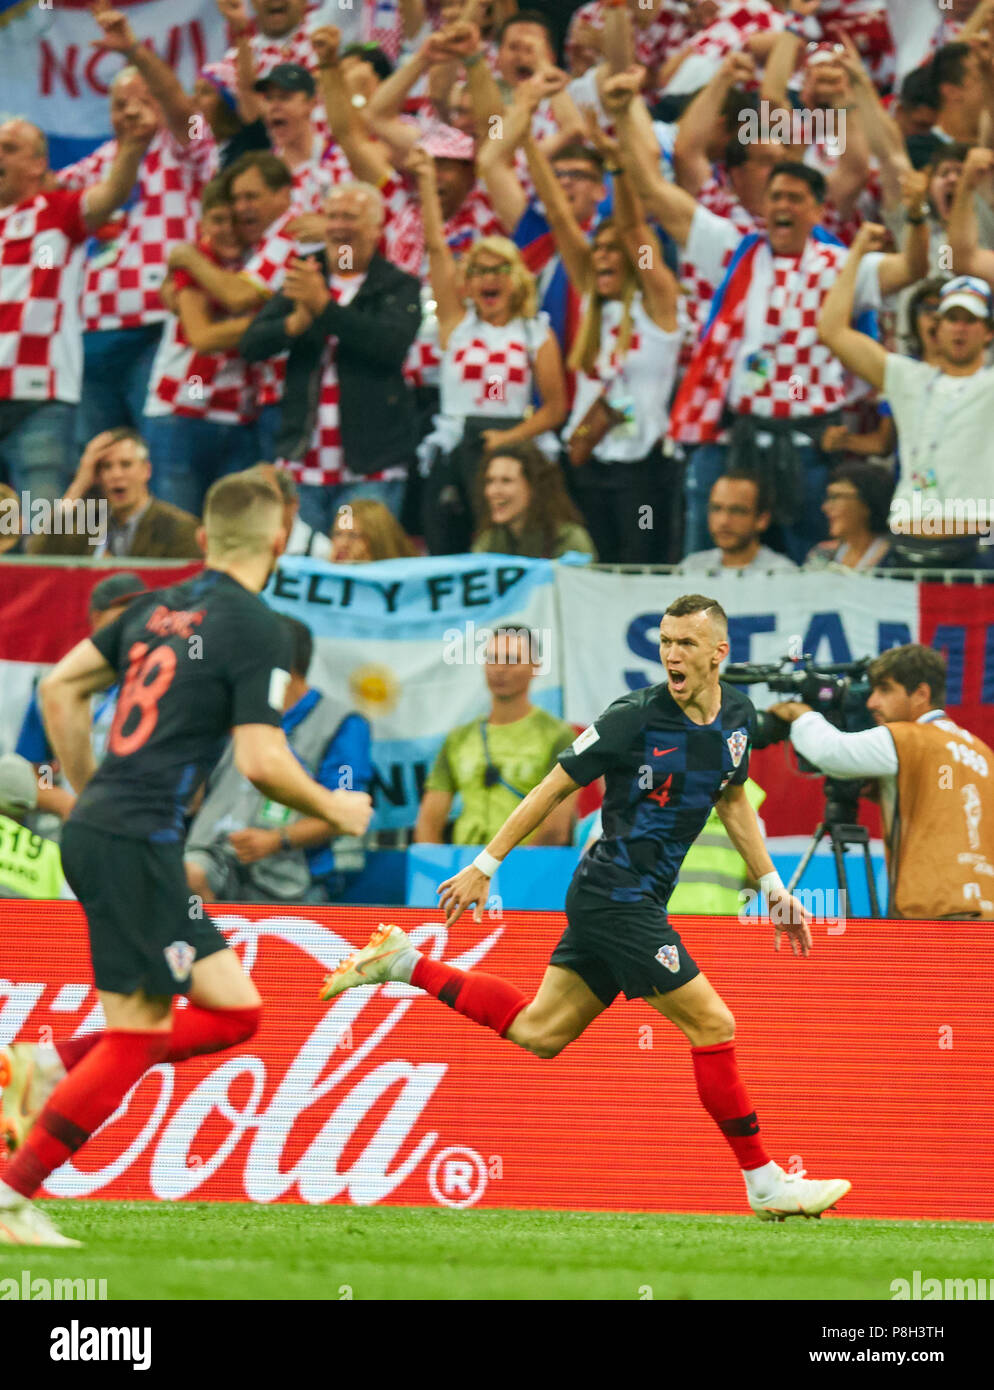 Moscow, Russia. 11th July 2018. England - Croatia, Soccer, Moscow, July 11, 2018 Ivan PERISIC, Croatia Nr.4   celebrates his goal  1-1 ENGLAND  - CROATIA  FIFA WORLD CUP 2018 RUSSIA, Semifinal, Season 2018/2019,  July 11, 2018 in Moscow, Russia. © Peter Schatz / Alamy Live News Stock Photo